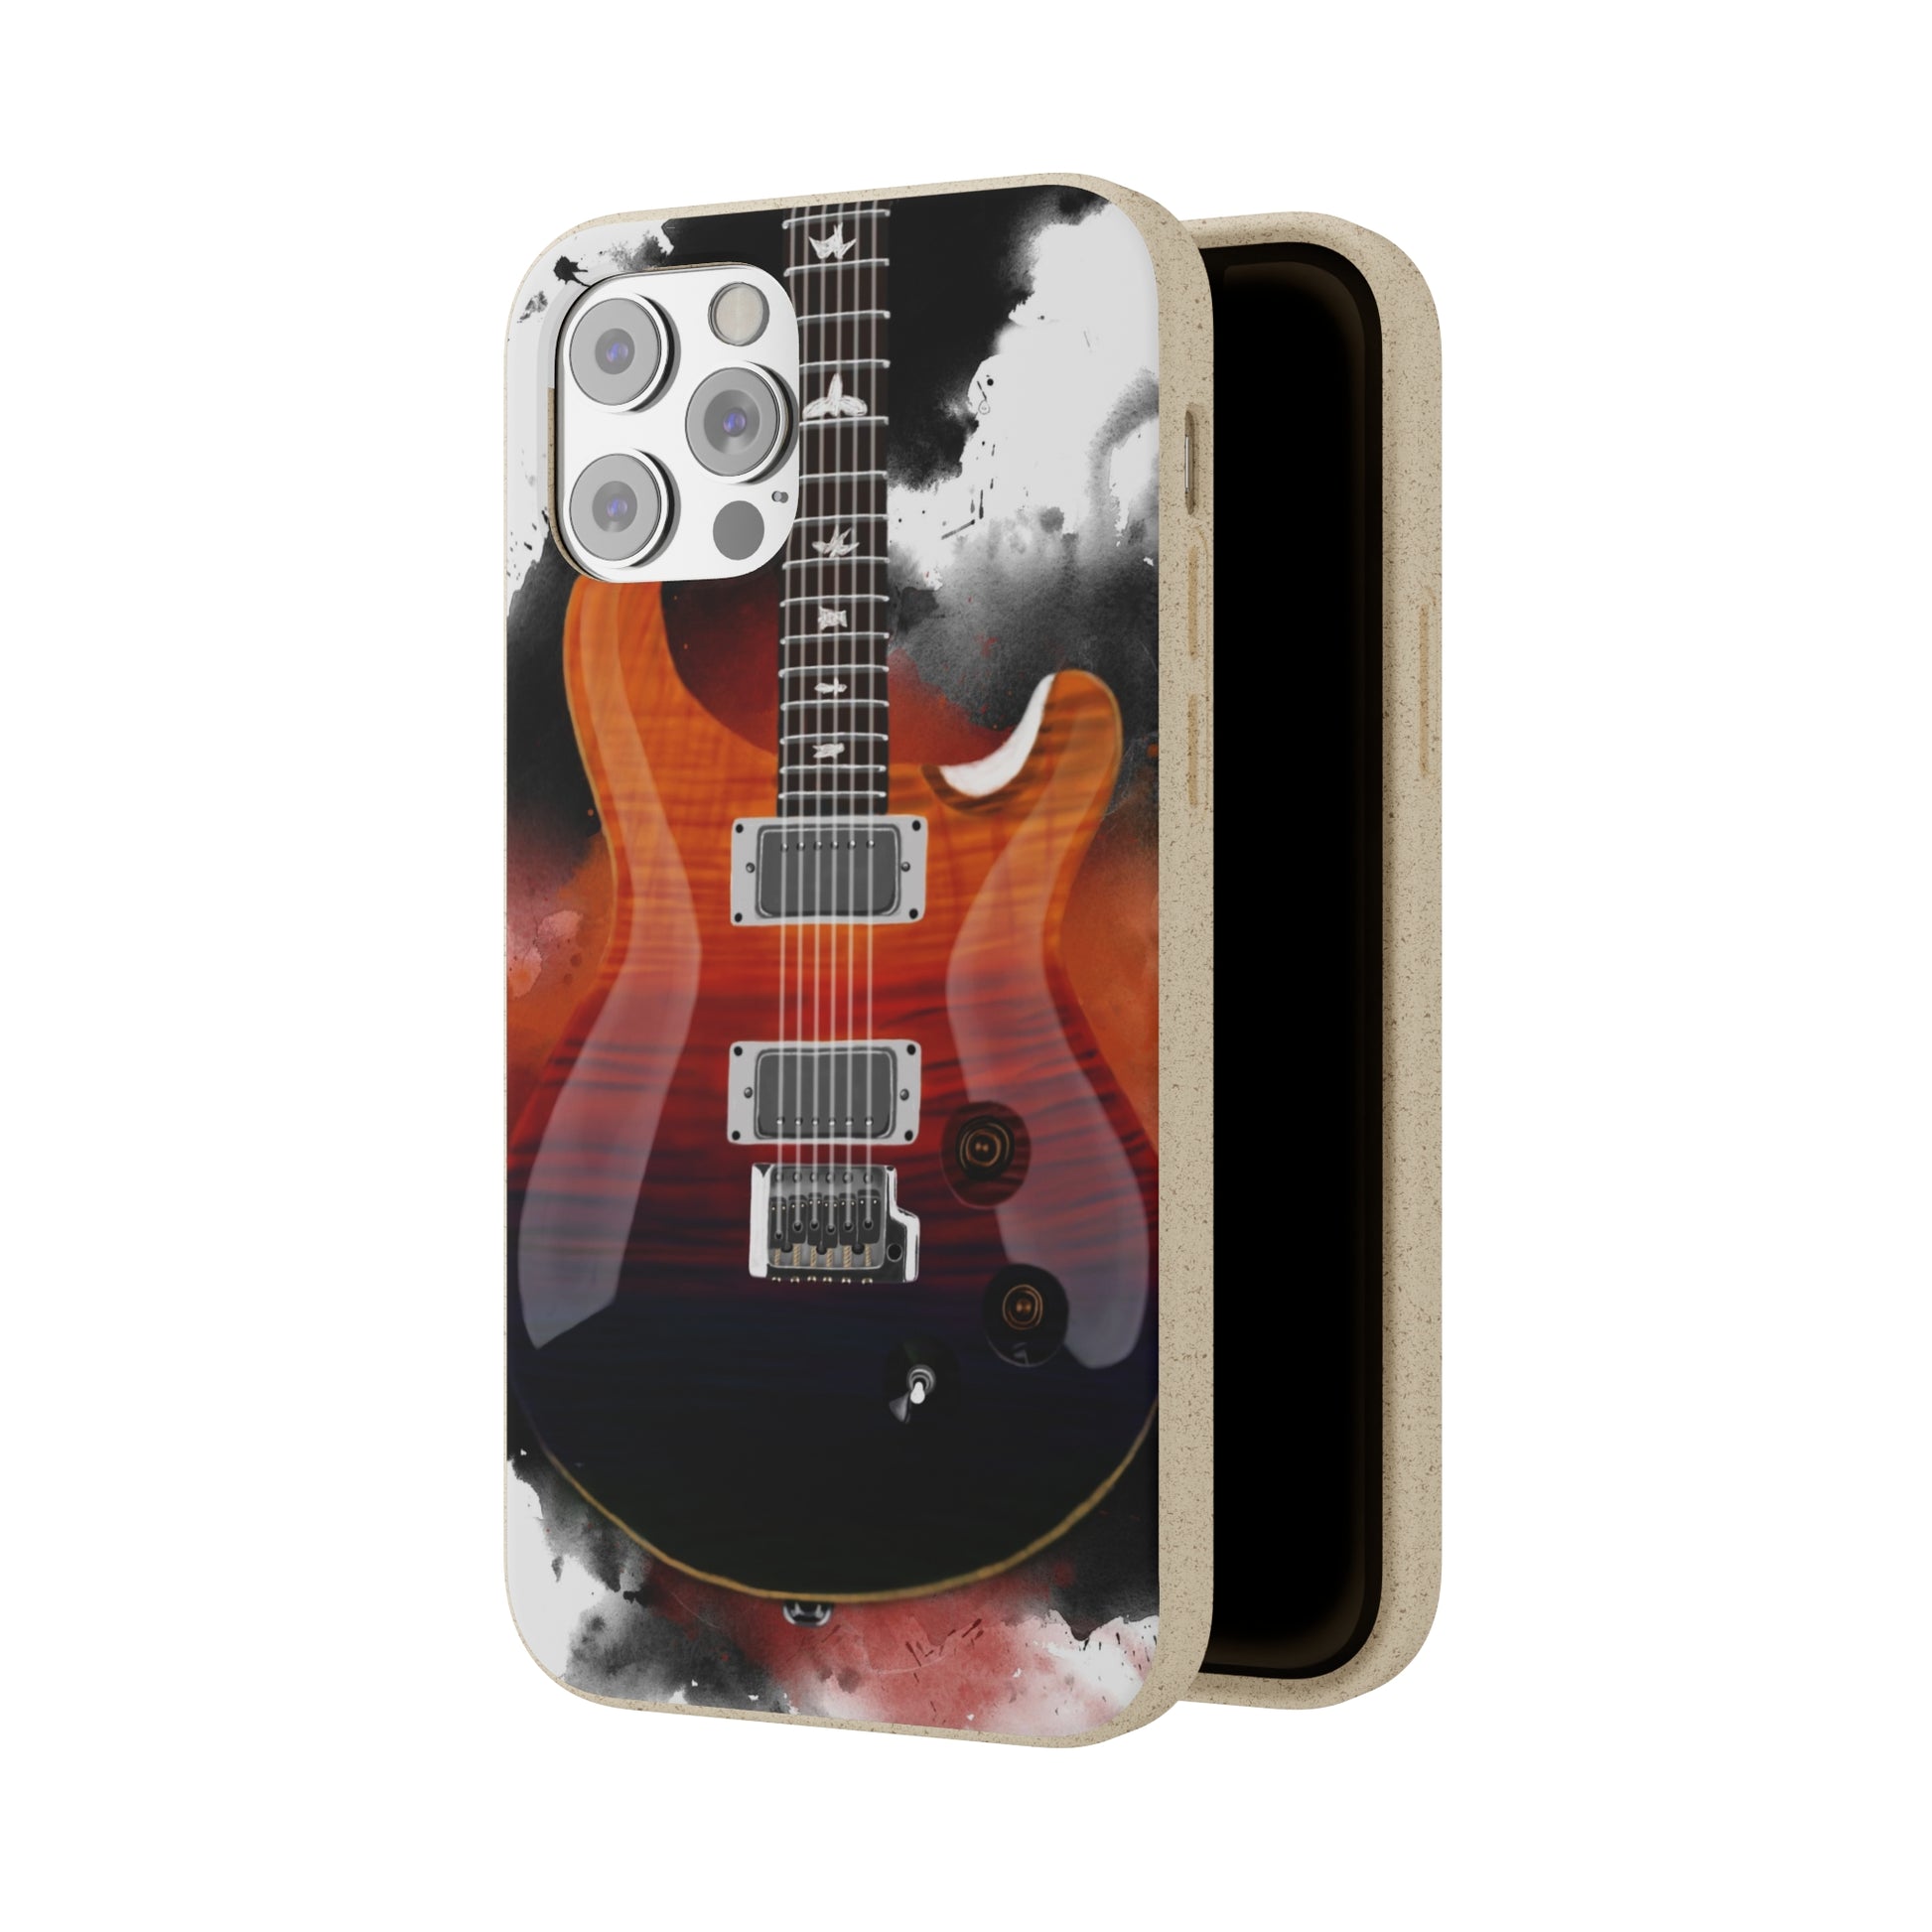 digital painting of an orange blue electric guitar printed on a biodegradable iphone phone case